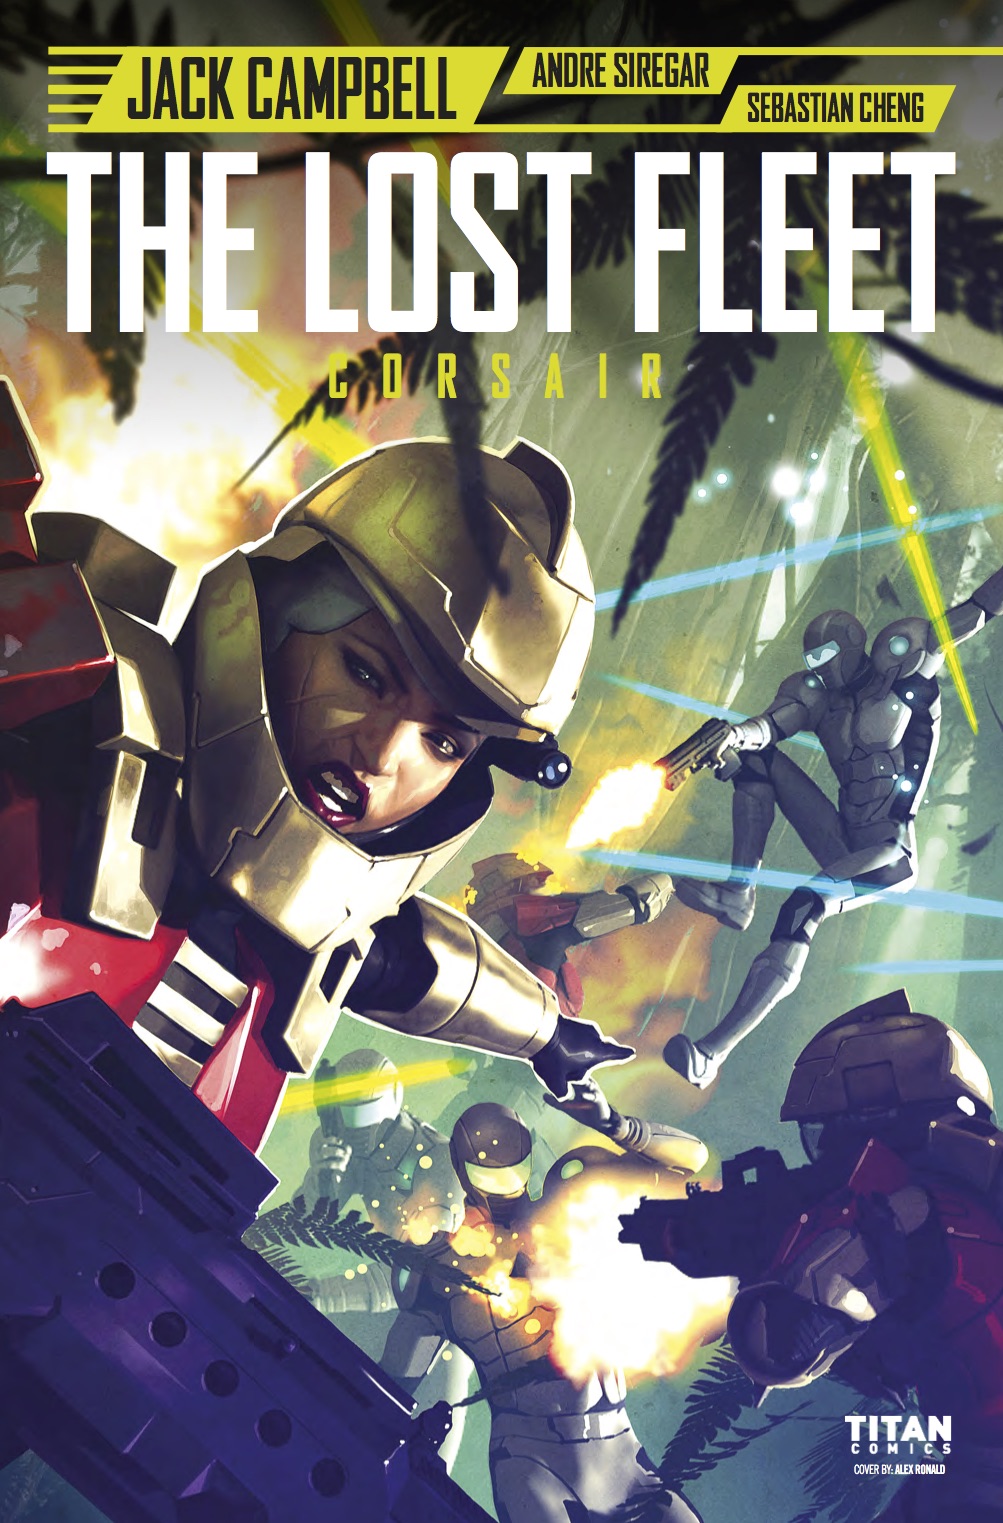 The Lost Fleet - Corsair #5 - Cover A by Alex Ronald